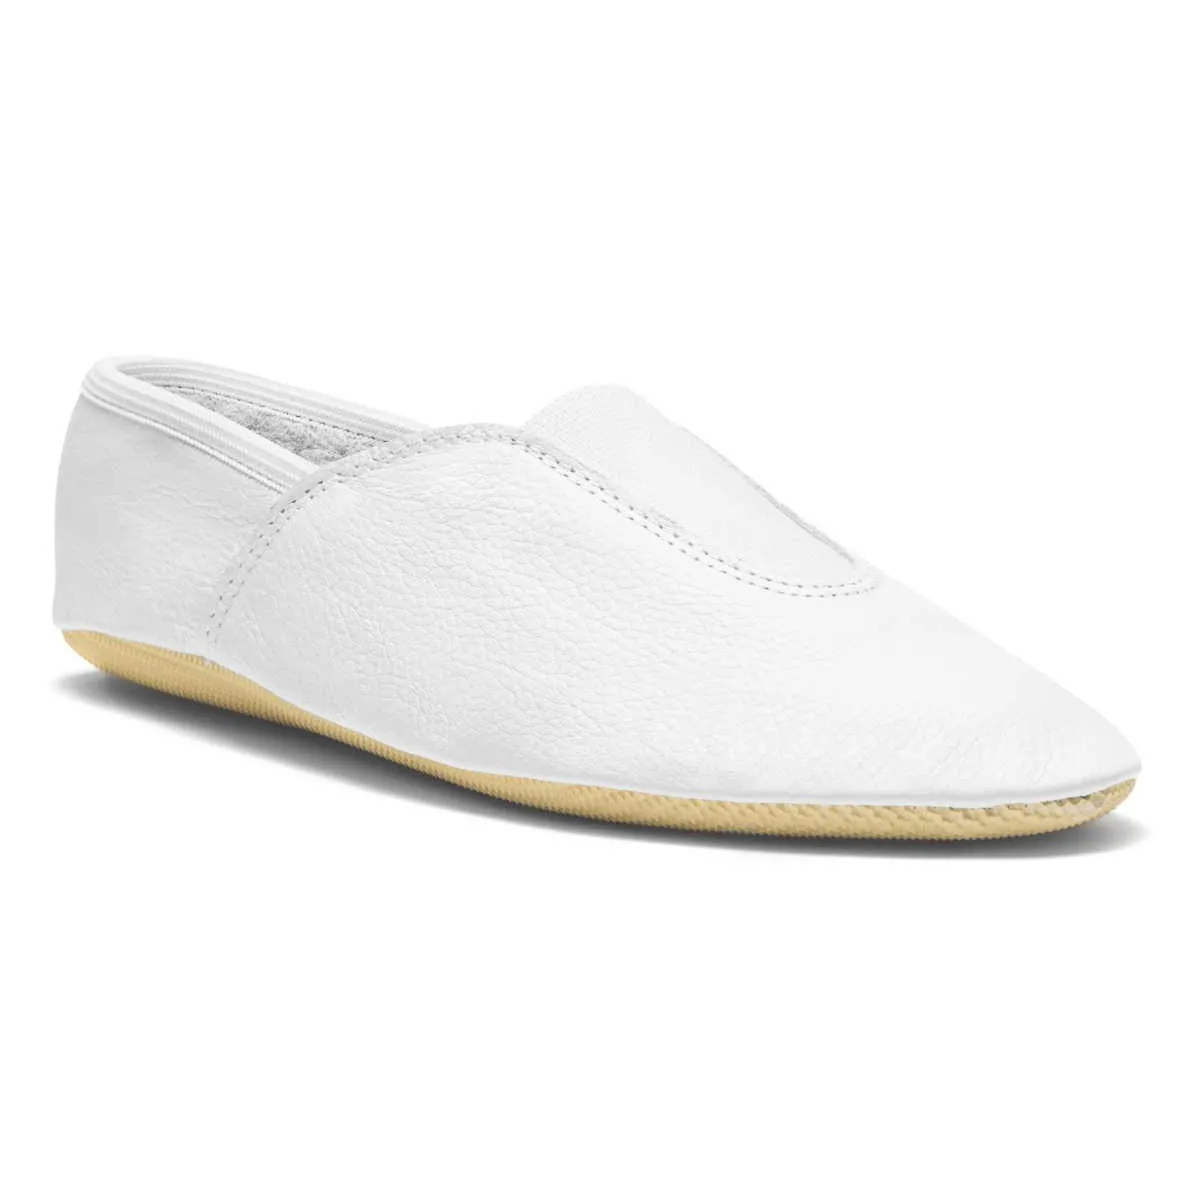 Gymnastics shoes white - mat shoes slippers barefoot shoes